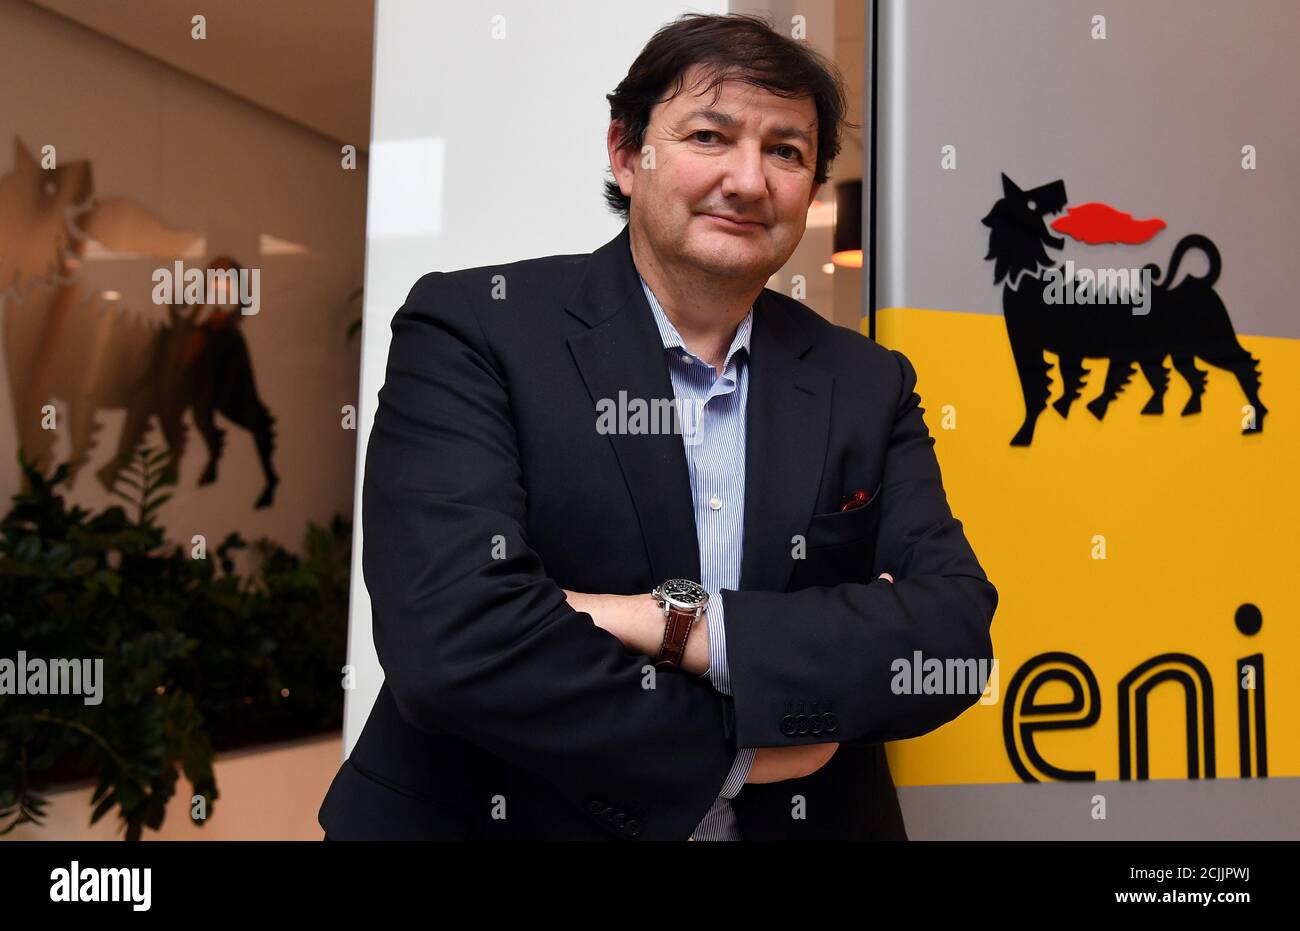 Chief Exploration Officer Luca Bertelli poses at the in San Donato near Italy, September 15, 2017. Picture taken September 15, 2017. To match Insight ENI-EXPLORATION/ REUTERS/Alberto Lingria Stock Photo - Alamy